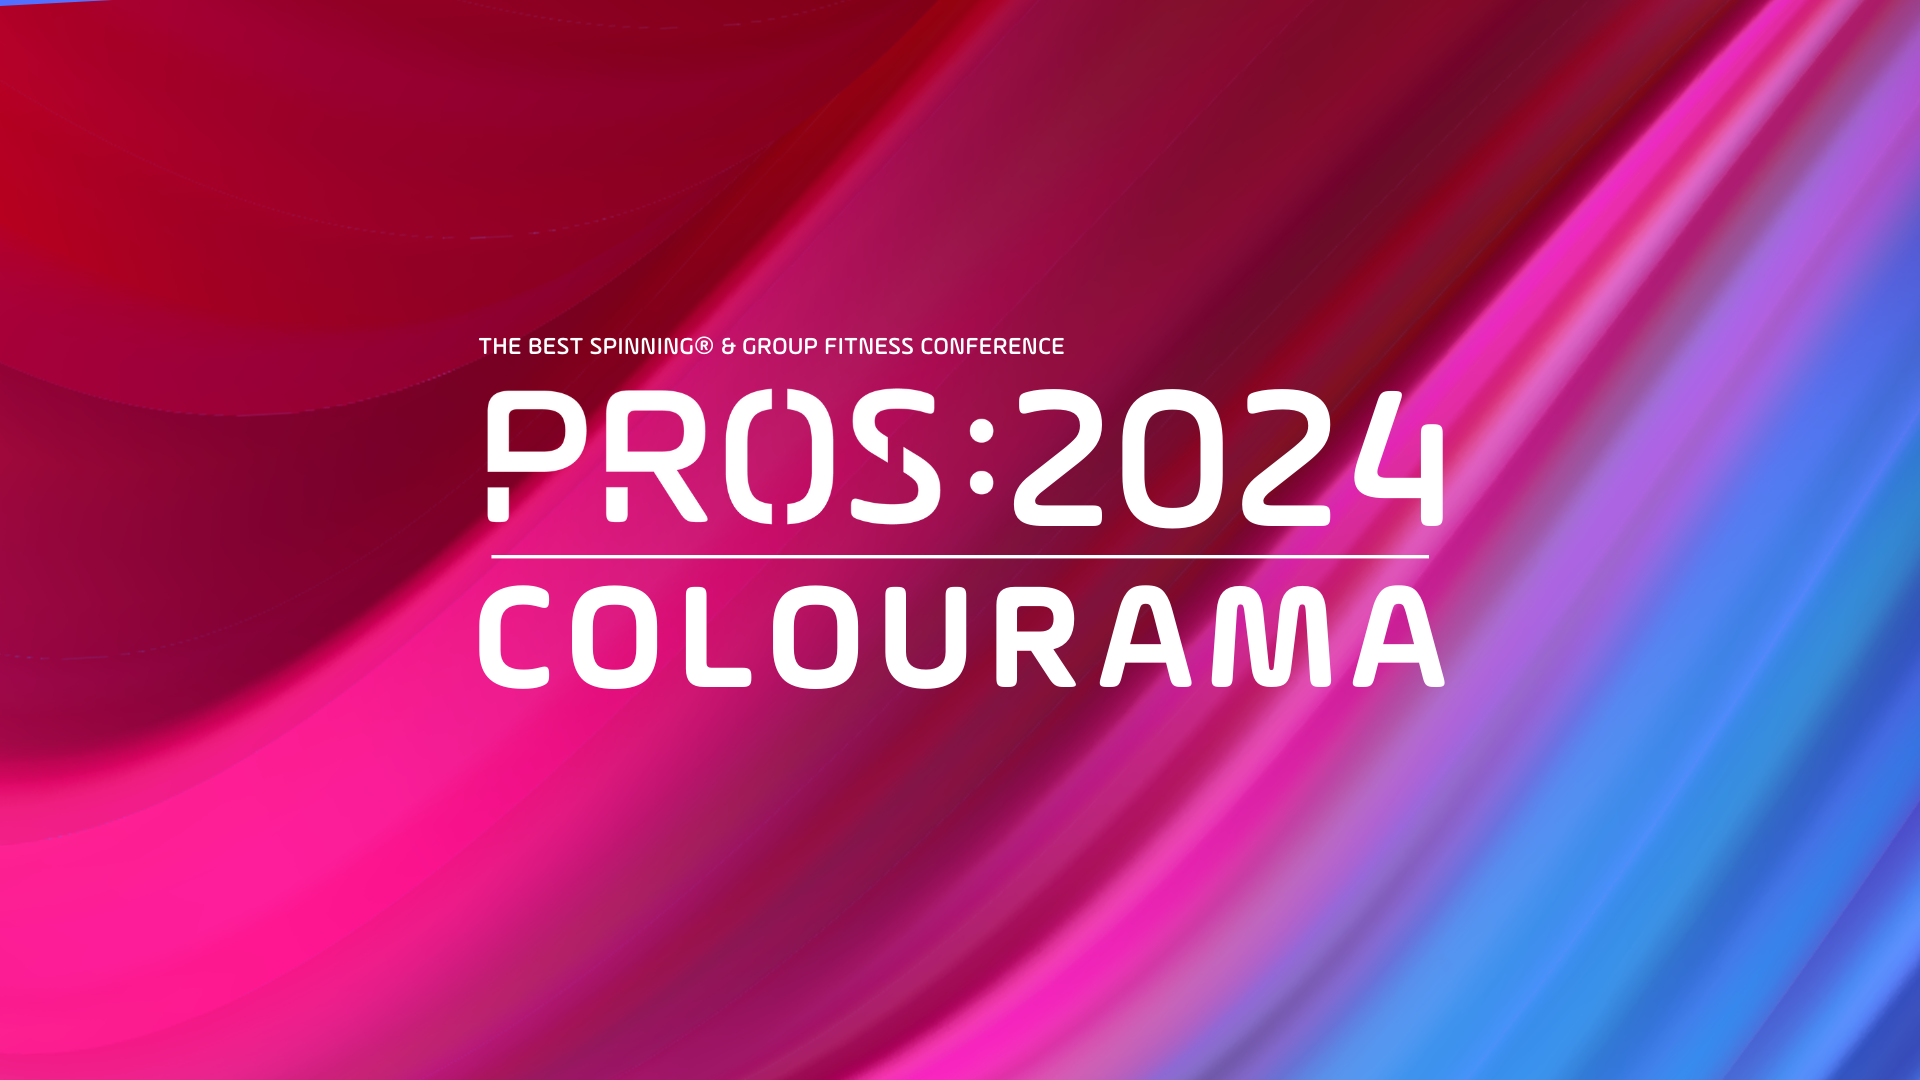 PROS 2024 |Spinning® & Fitness Conference image